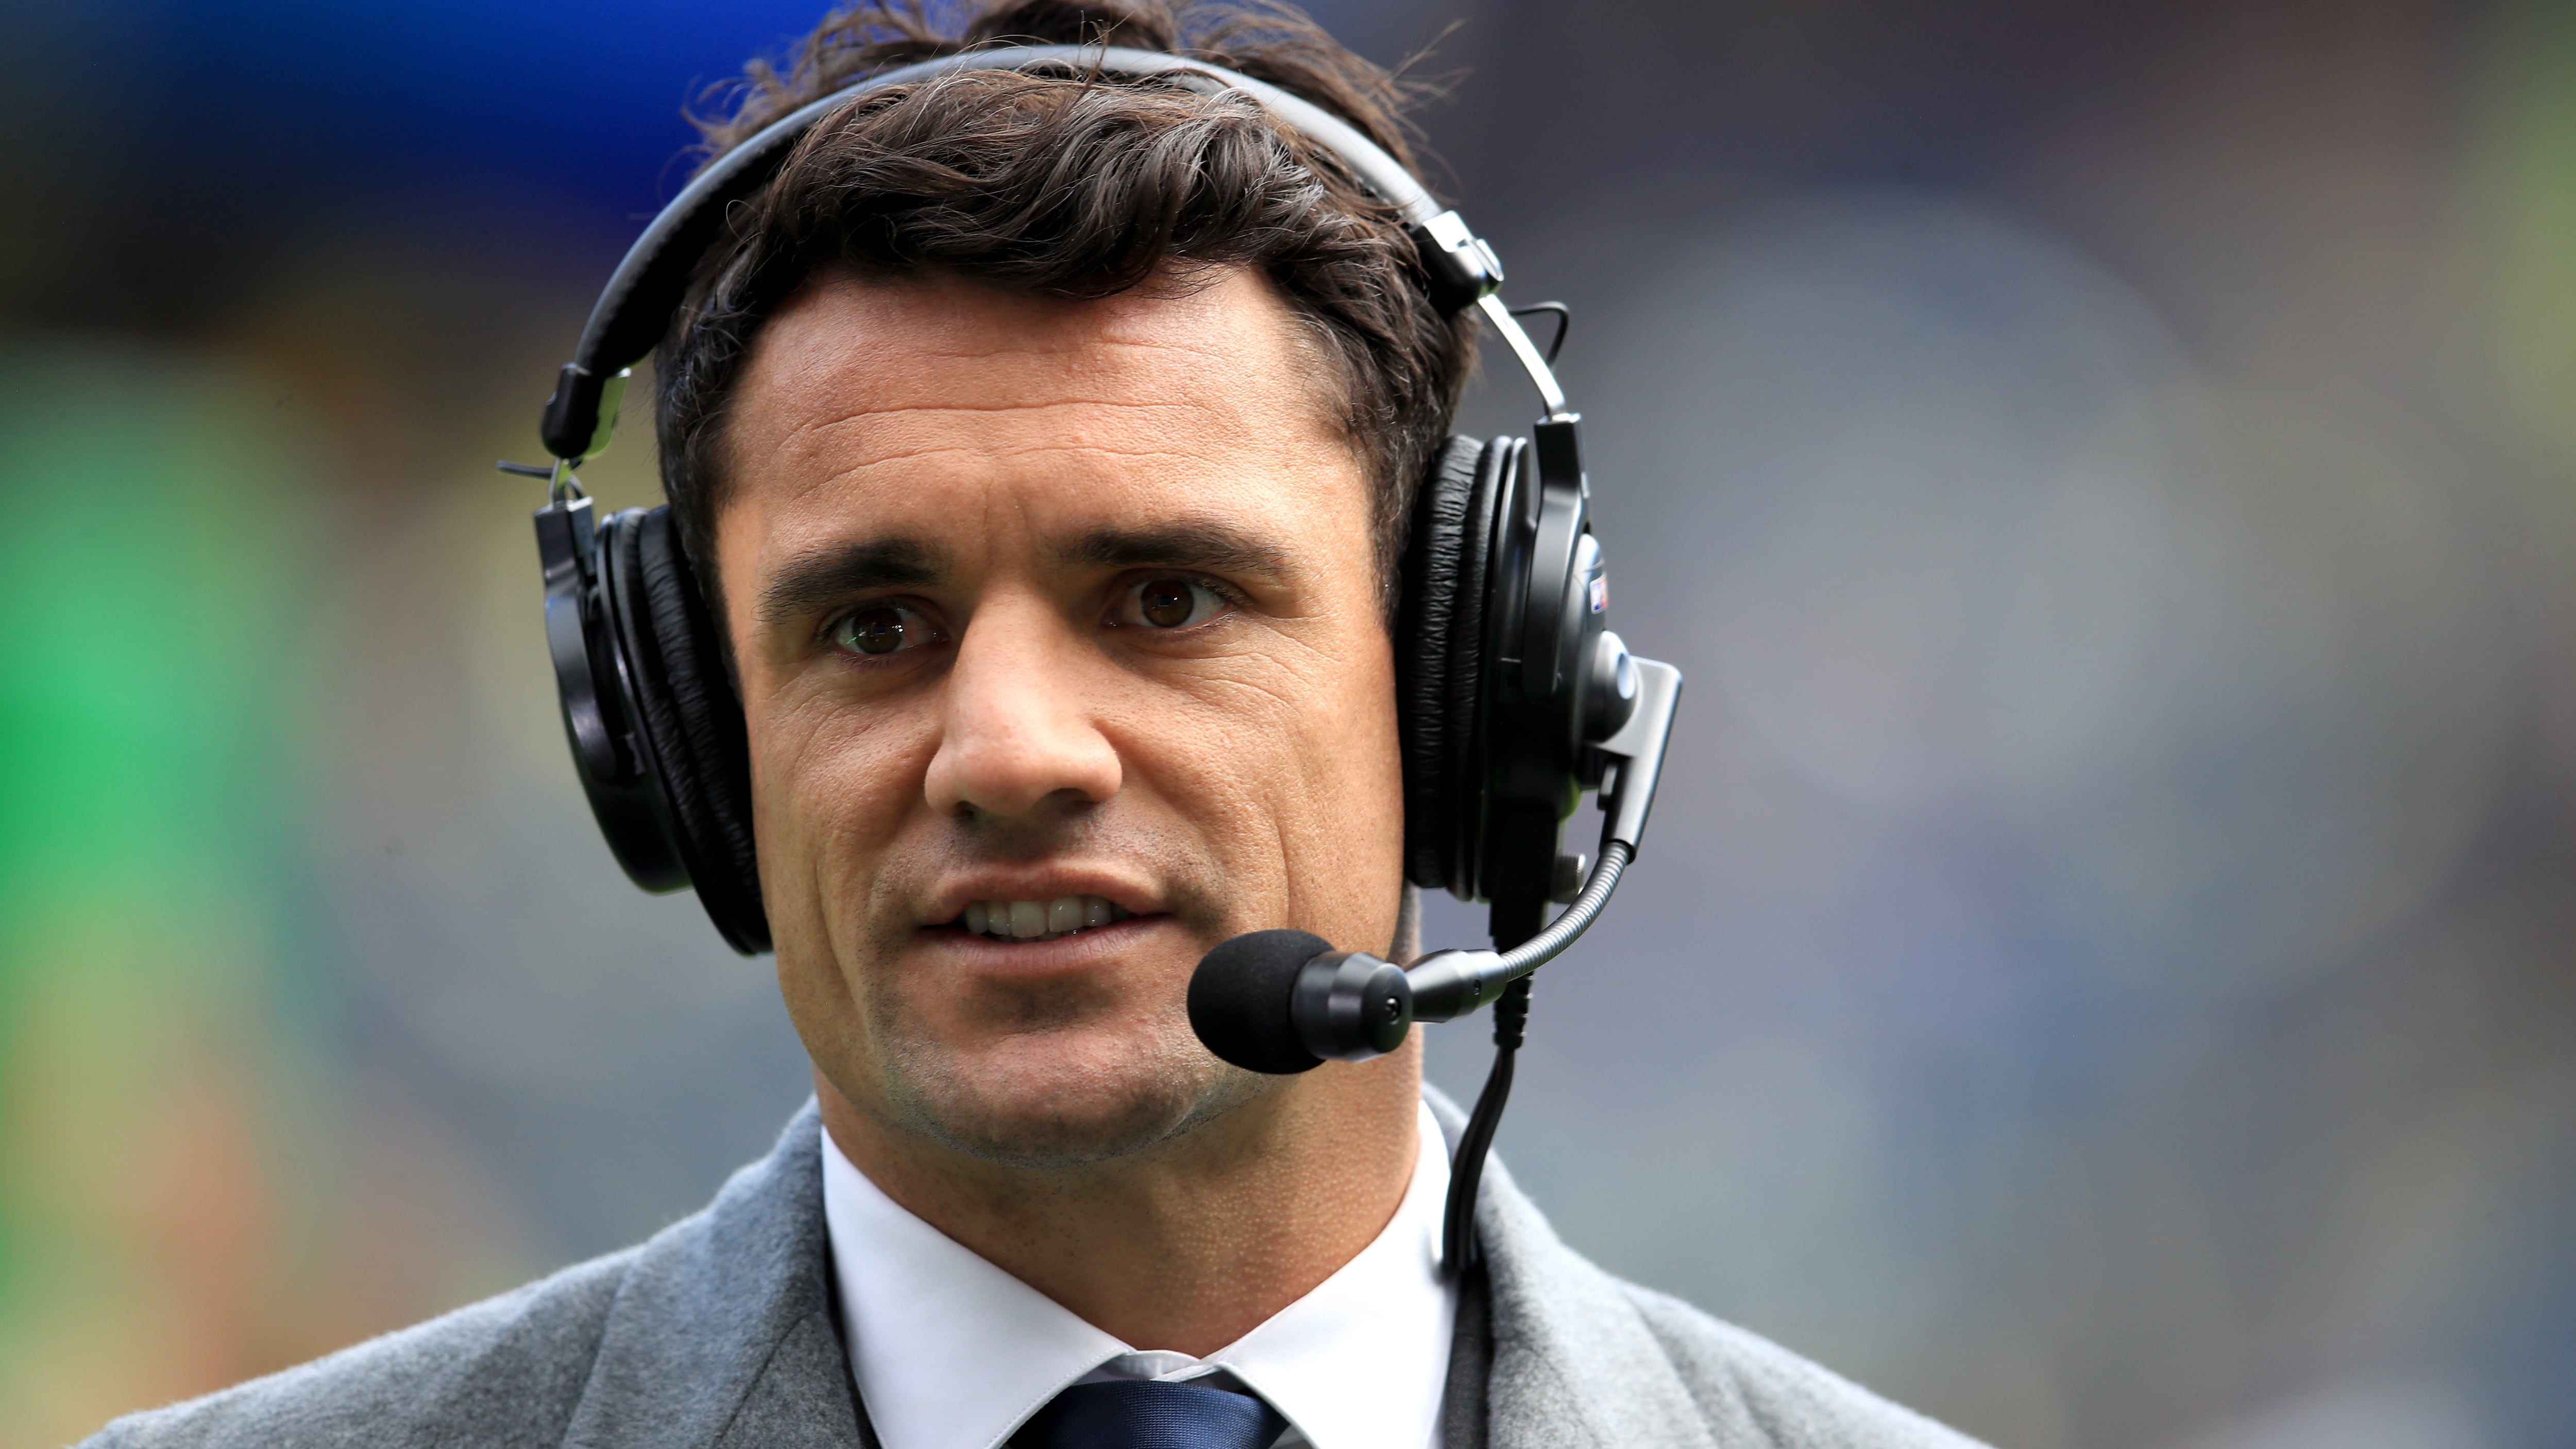 Former New Zealand fly-half Dan Carter believes England will want to ‘make a statement’ in their two Tests against the All Blacks